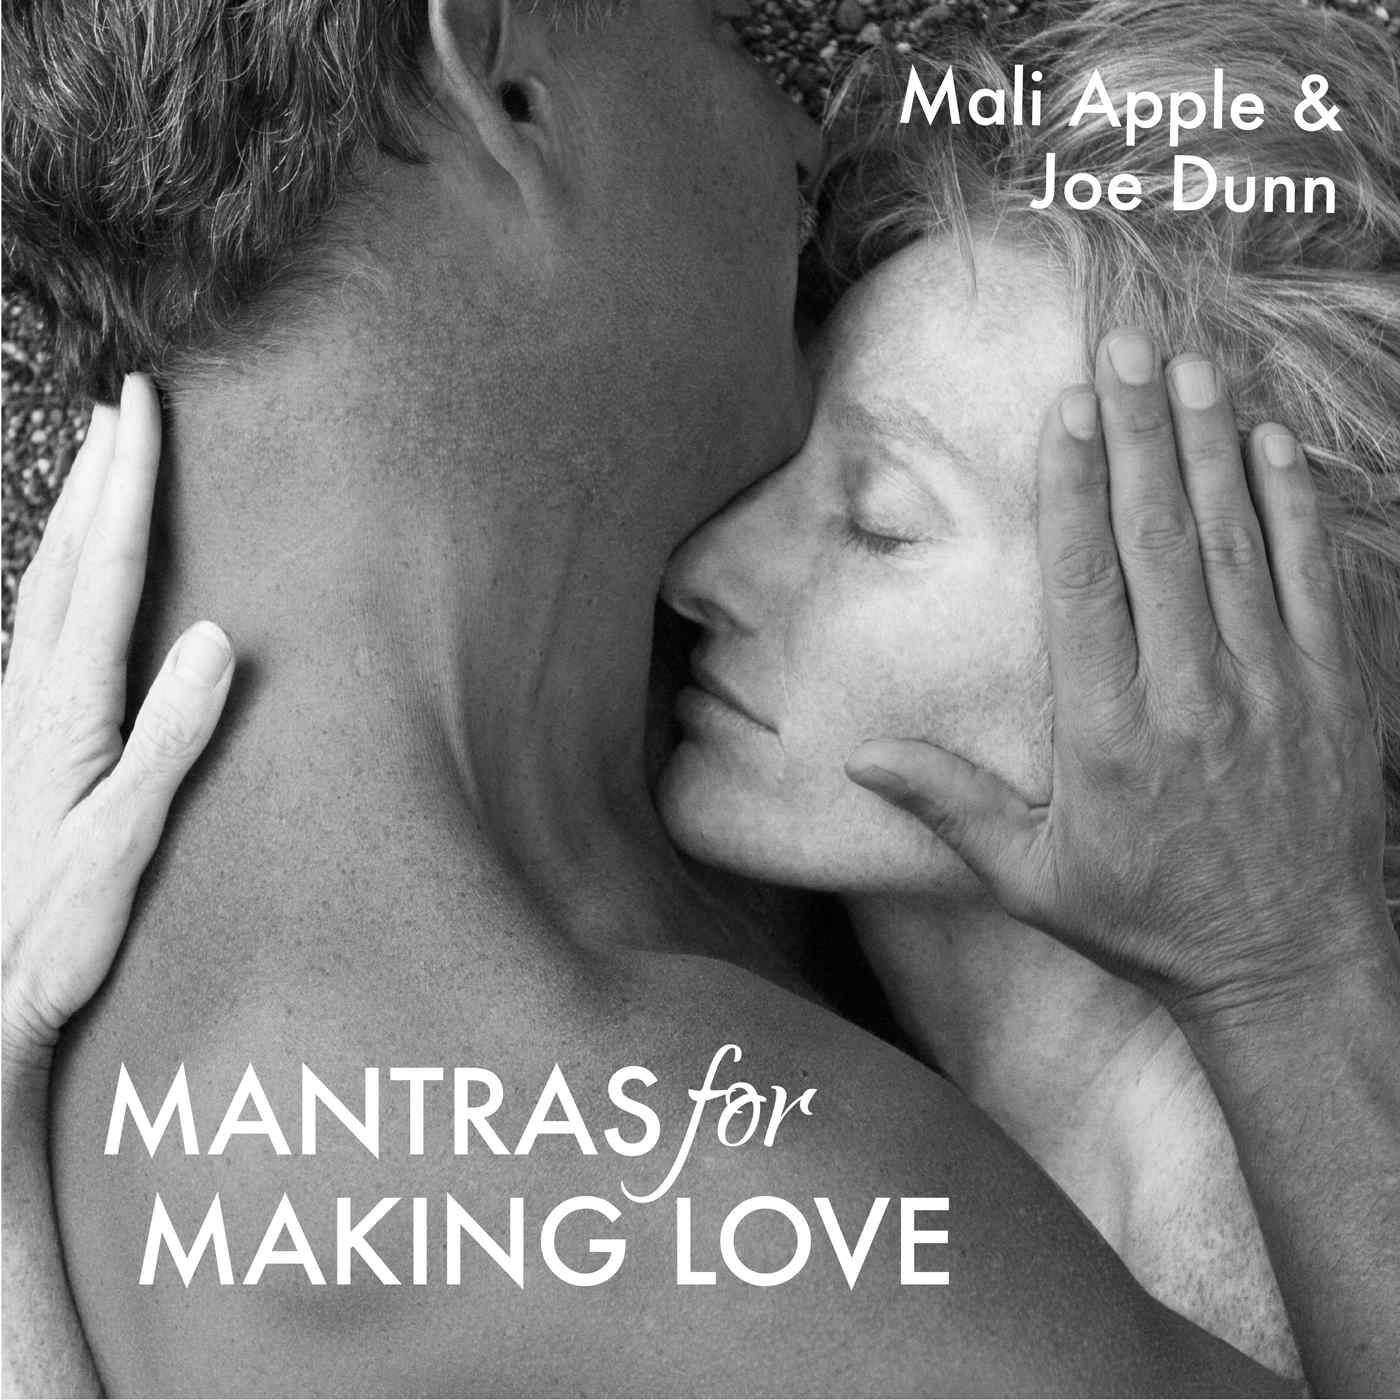 Mantras for Making Love